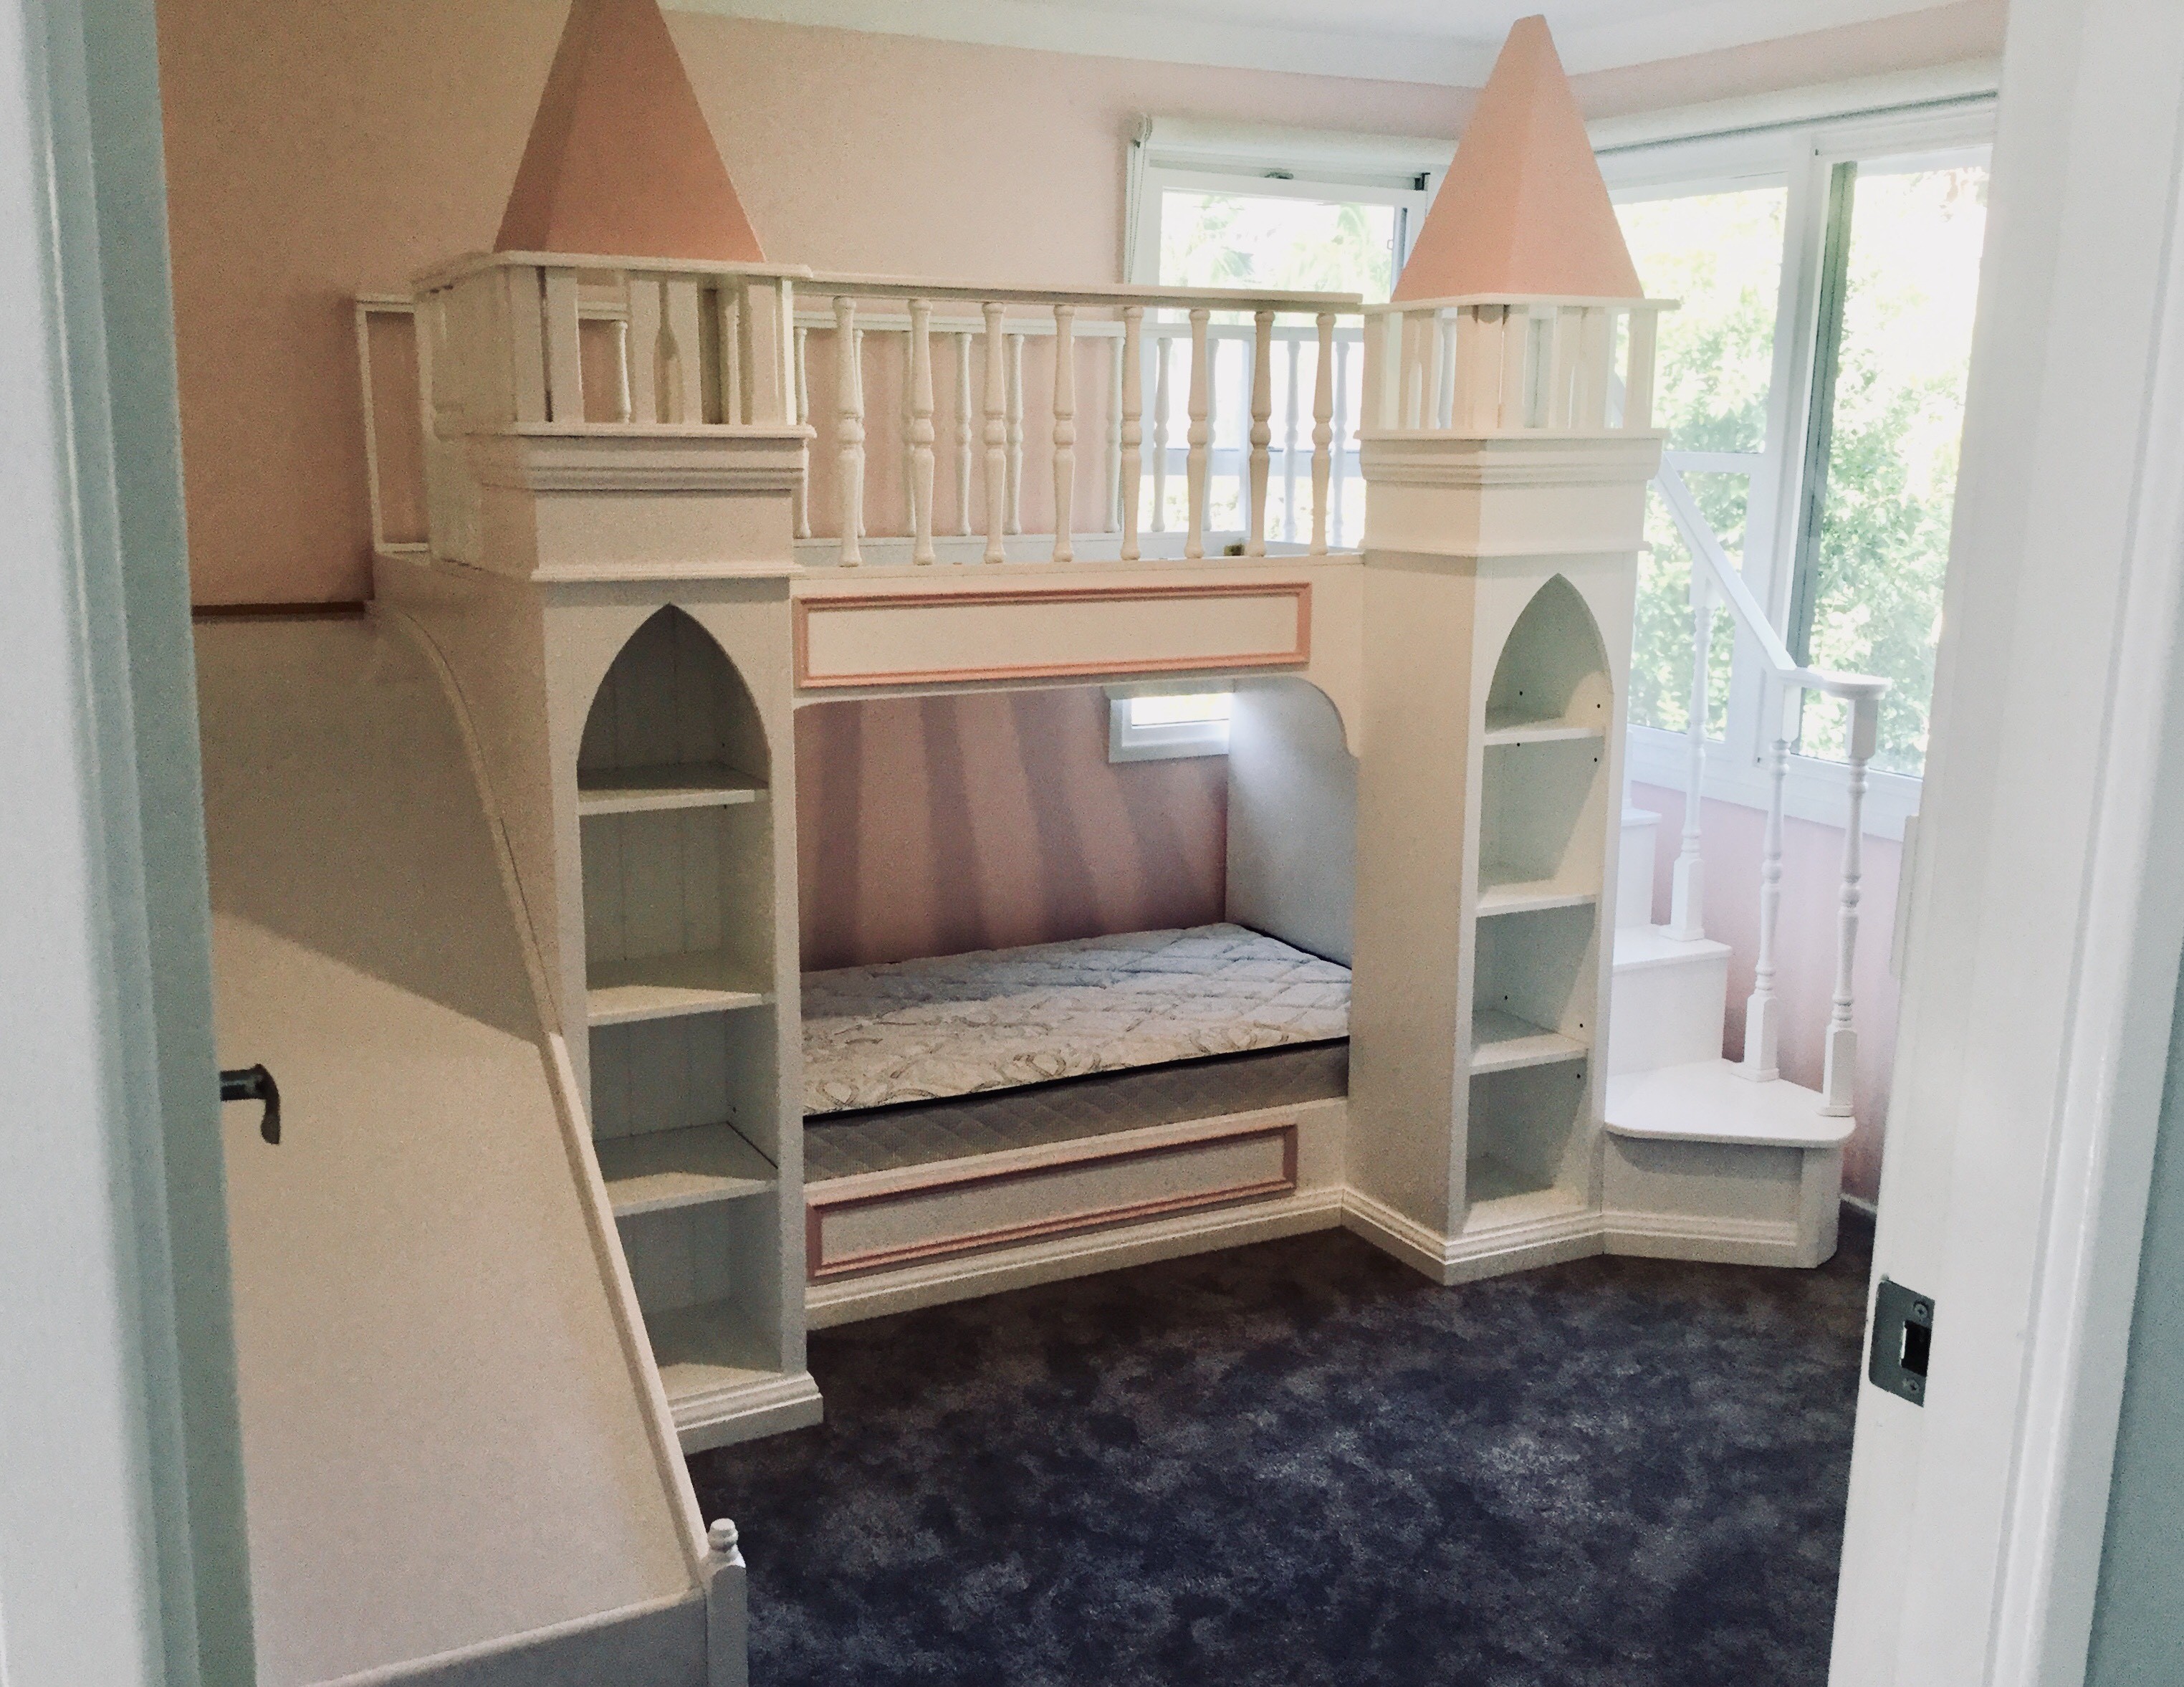 loft bed with cubby